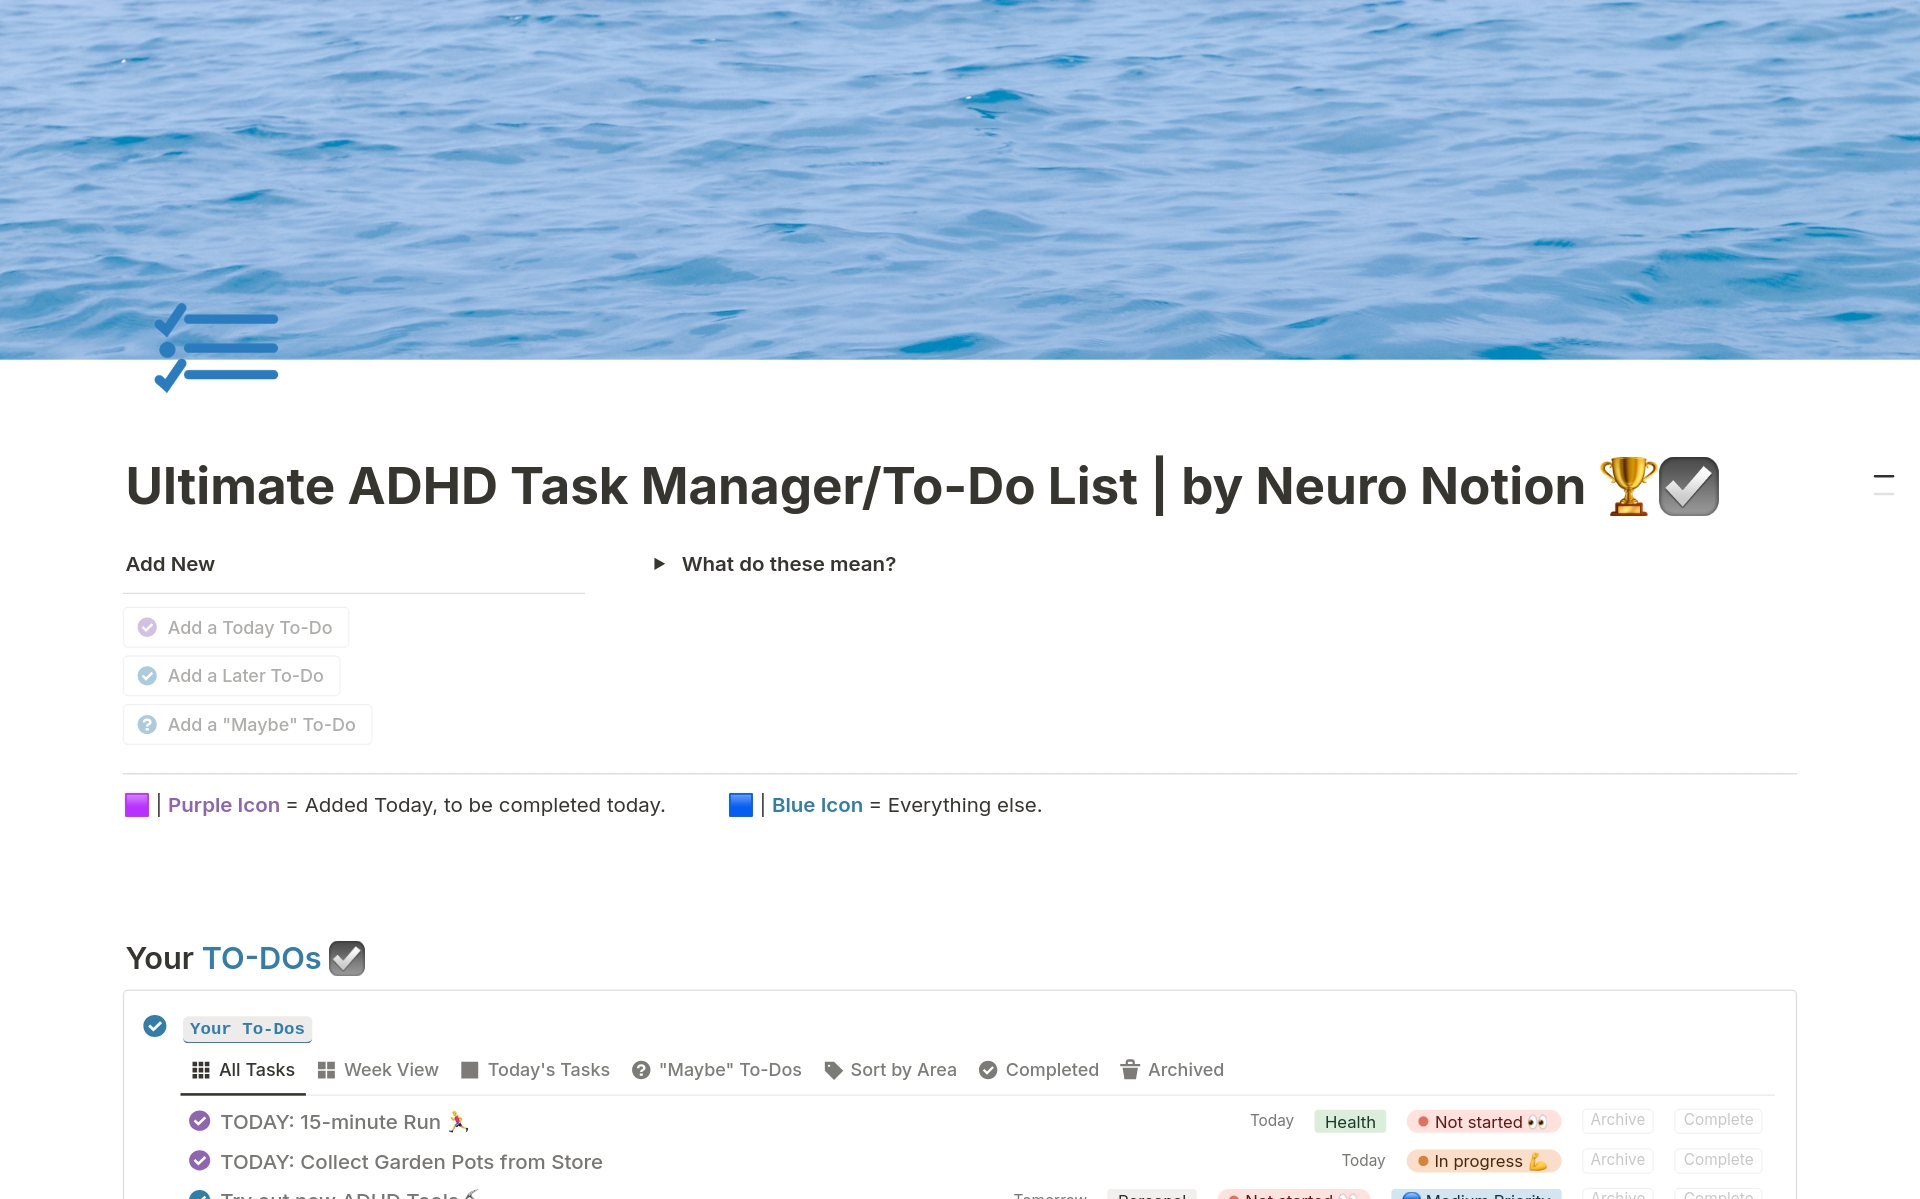 Ultimate ADHD Task Manager/To-Do List 🏆☑️のテンプレートのプレビュー